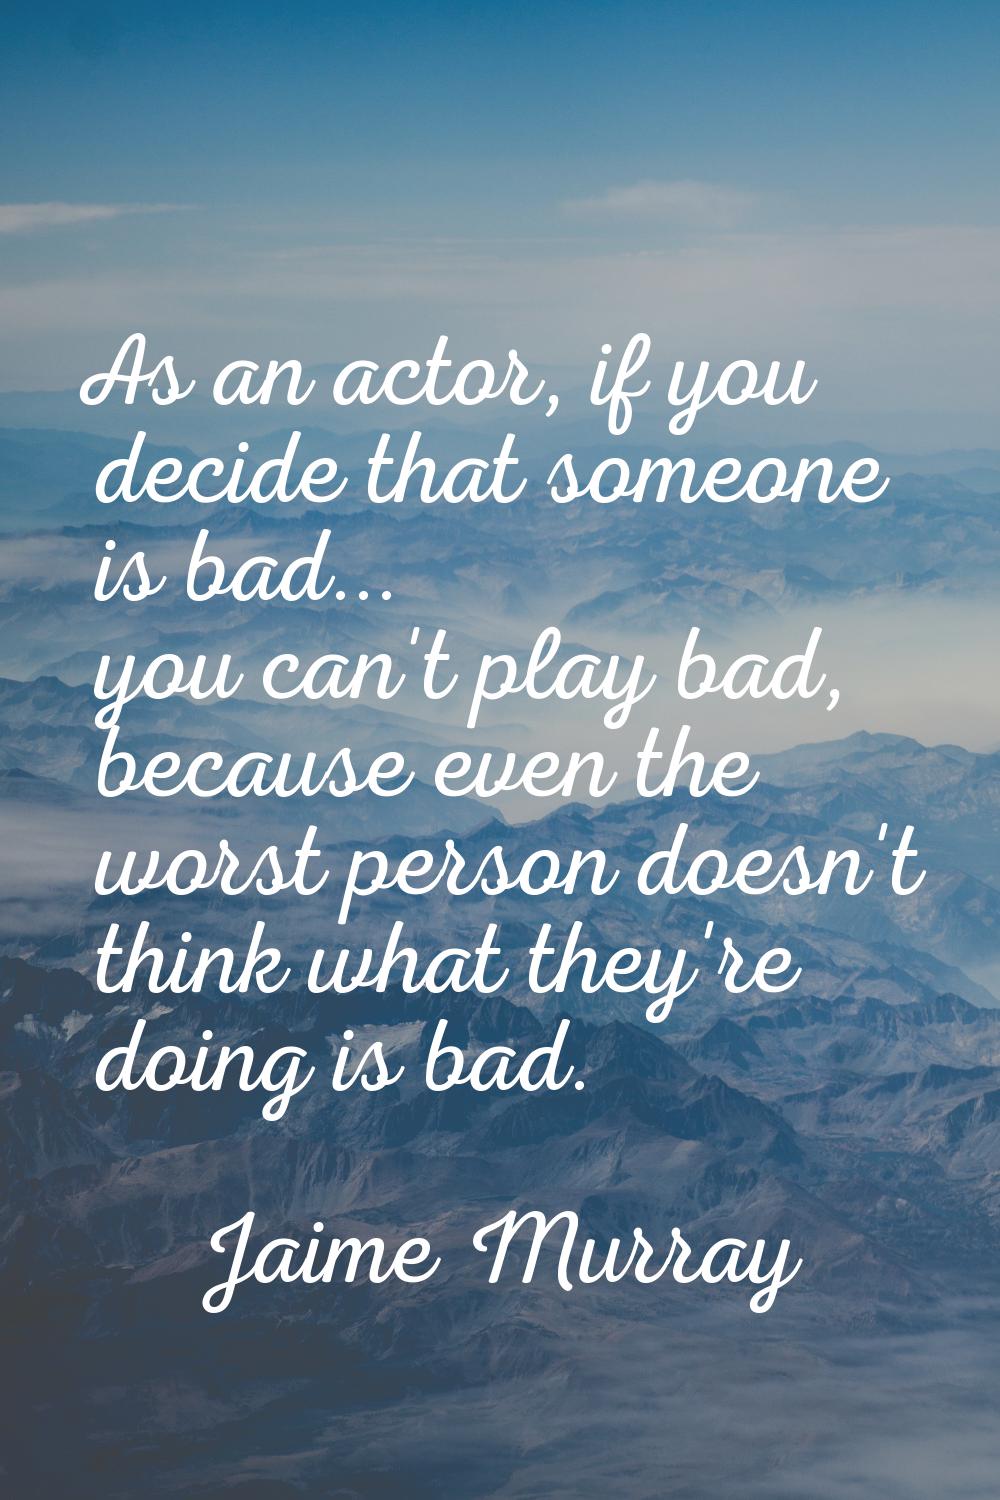 As an actor, if you decide that someone is bad... you can't play bad, because even the worst person